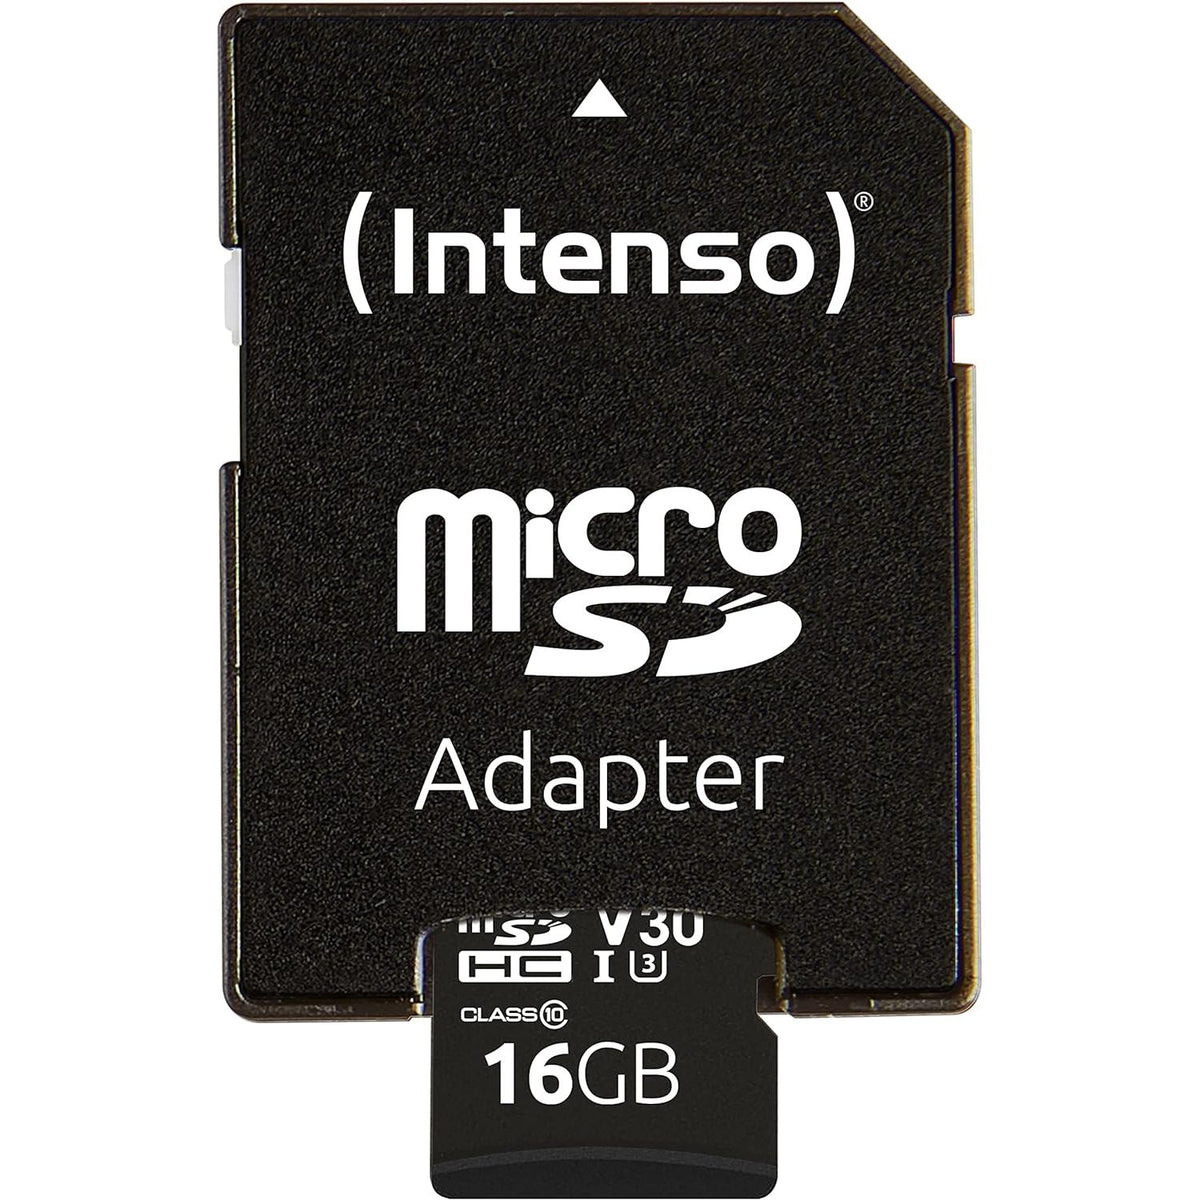 Intenso MicroSD UHS-I Class 10 16GB Memory Card - Black | 3433470 from Intenso - DID Electrical